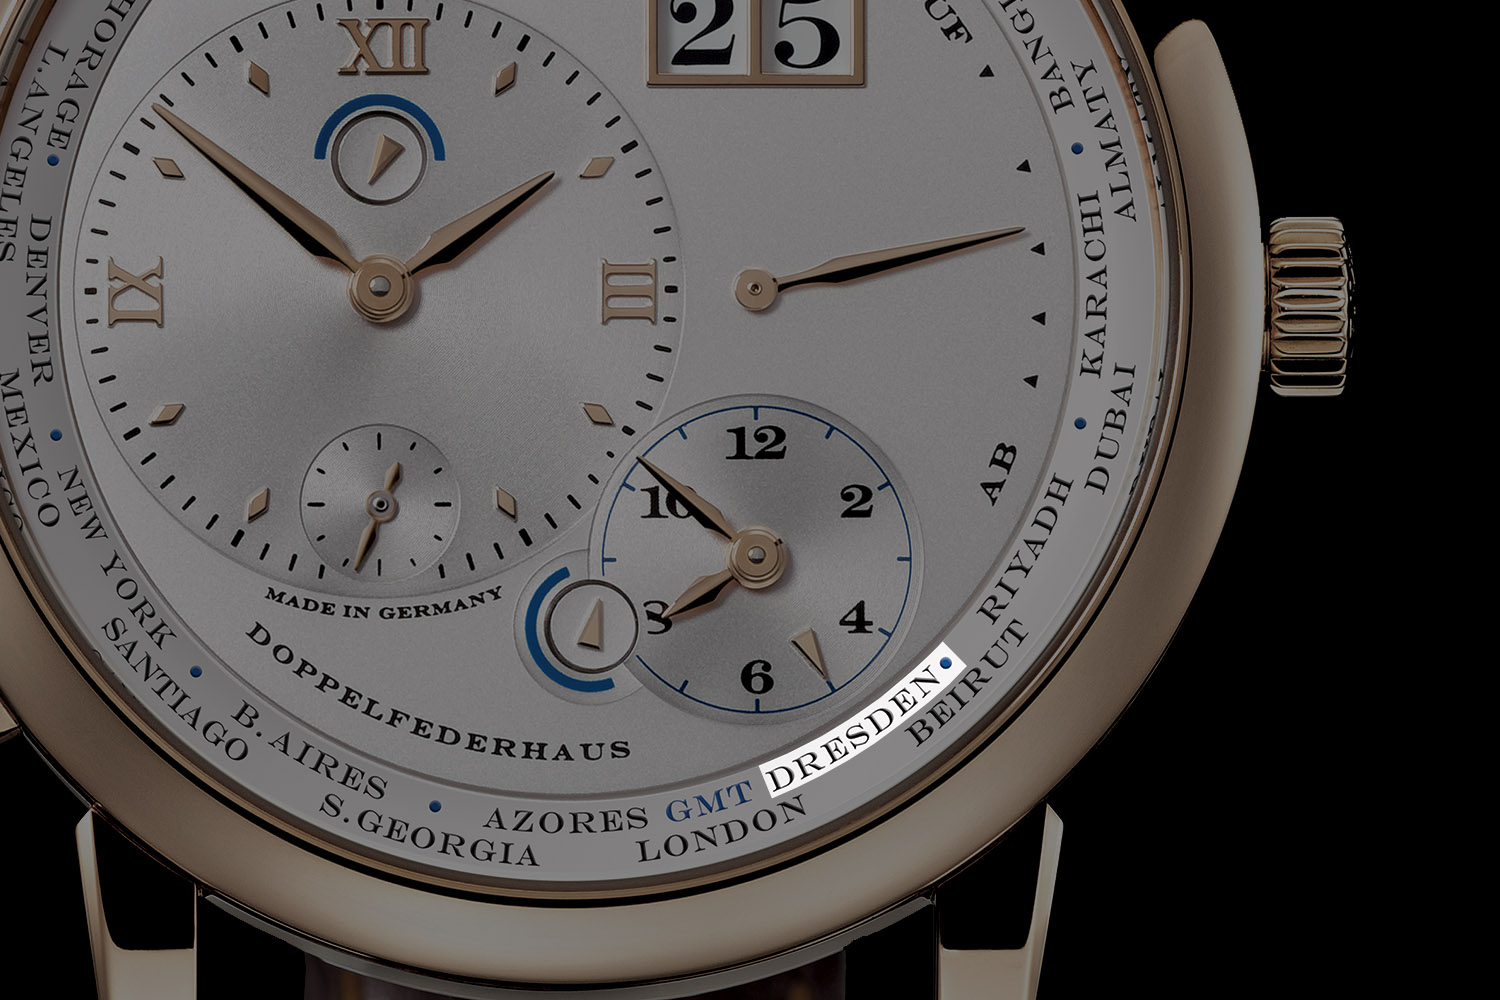 a-lange-sohne-lange-1-timezone-honey-gold-special-edition-dresden-dial-1